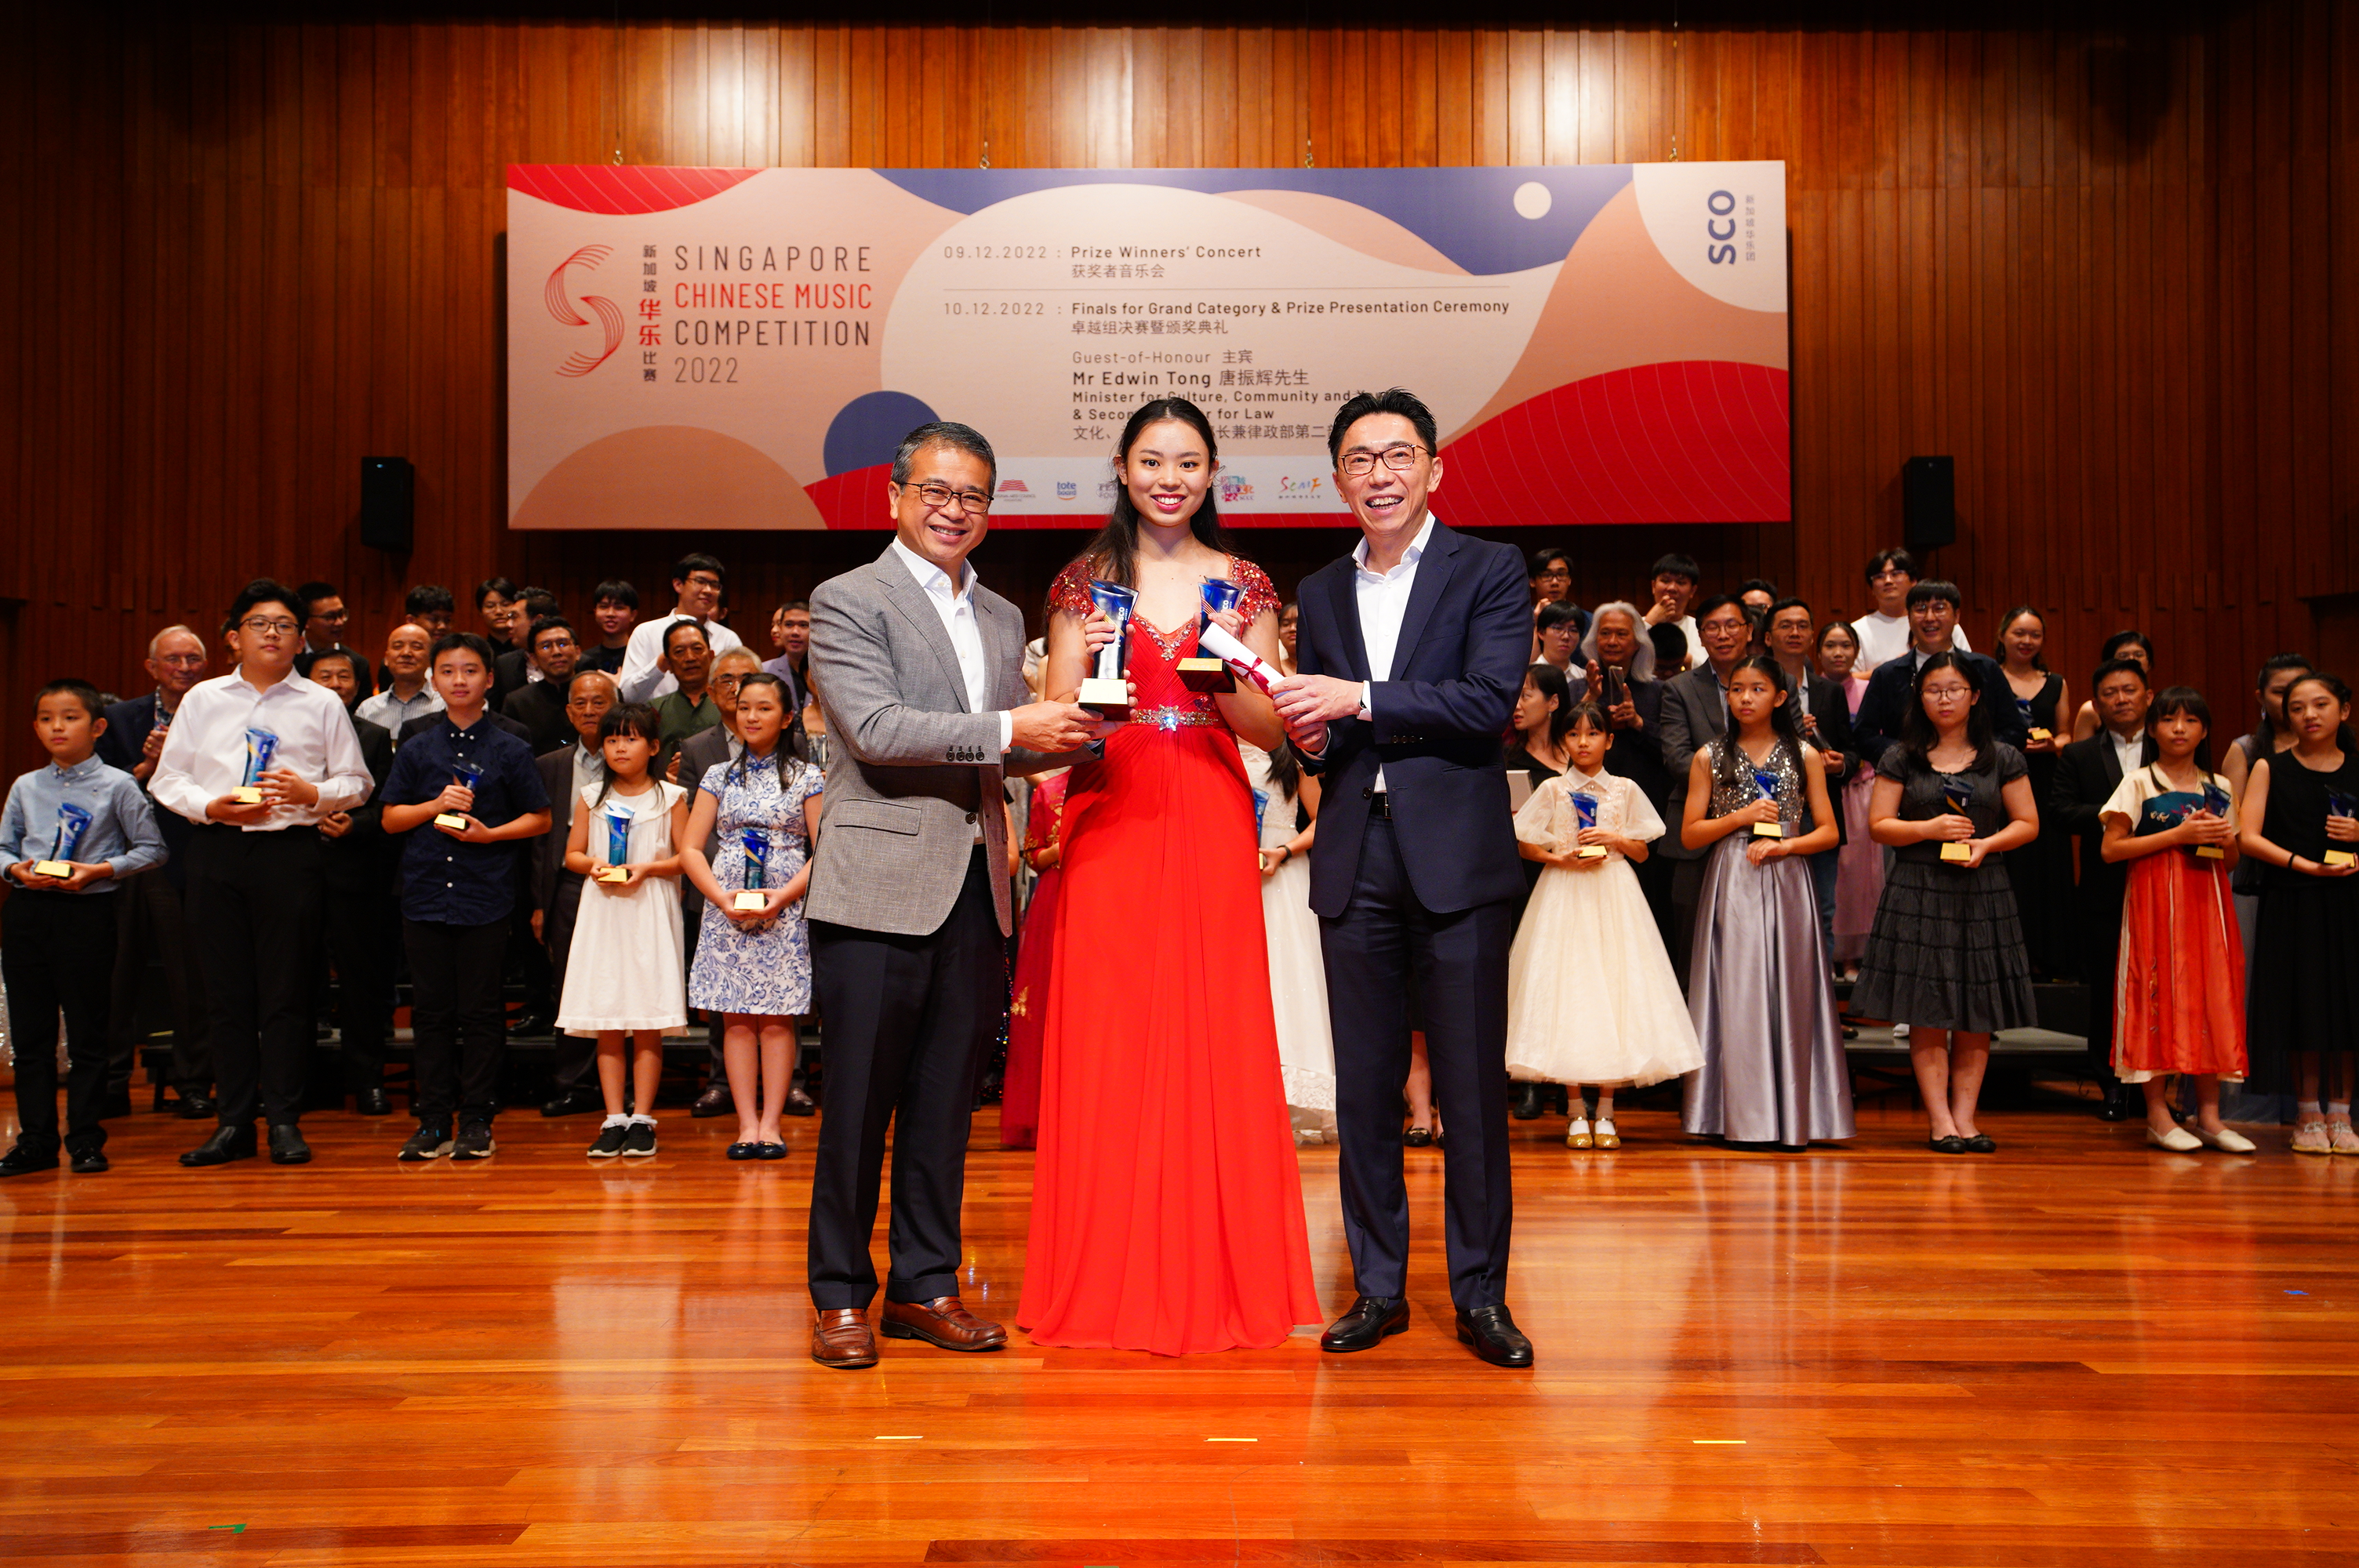 Grand Category Award Champion and Audience Choice Award Winner Amanda Toh Sze Suan with Minister Edwin Tong and SCO Board Chairman Mr Ng Siew Quan